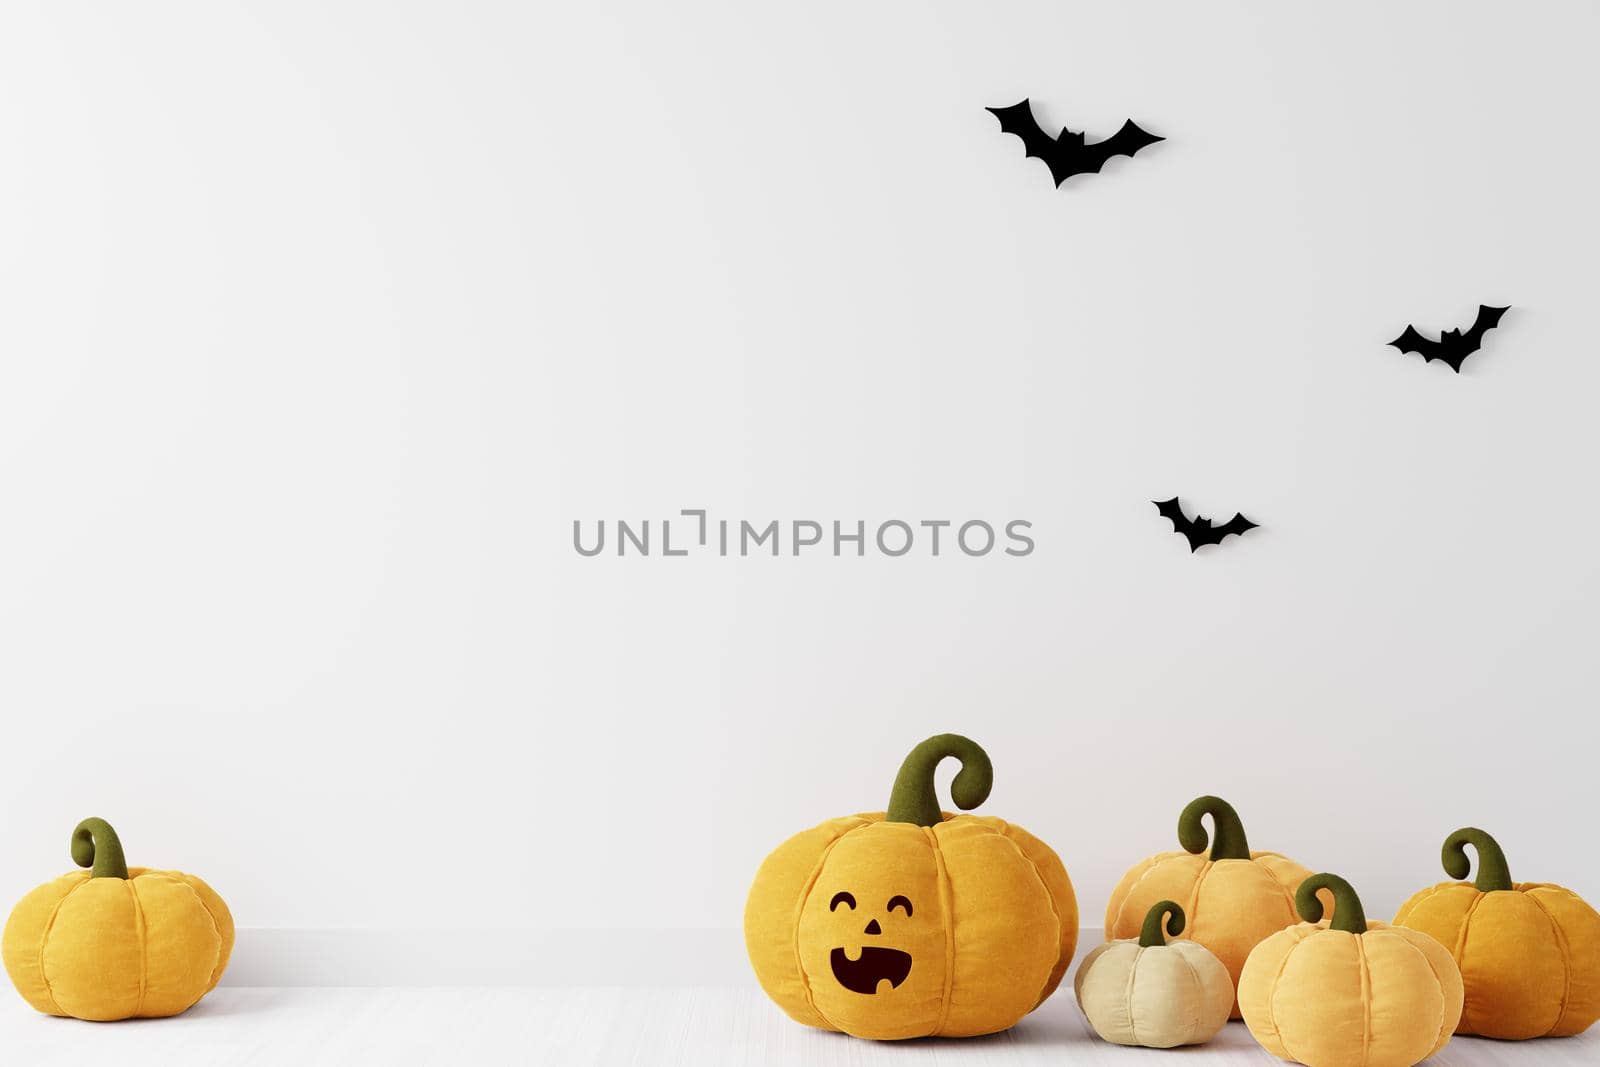 Halloween background copyspace with pumpkins and bats on white background, smiling pumpkin face, flying bats, 3D rendering, Halloween theme with pumpkins and bats on white background 3D illustration.